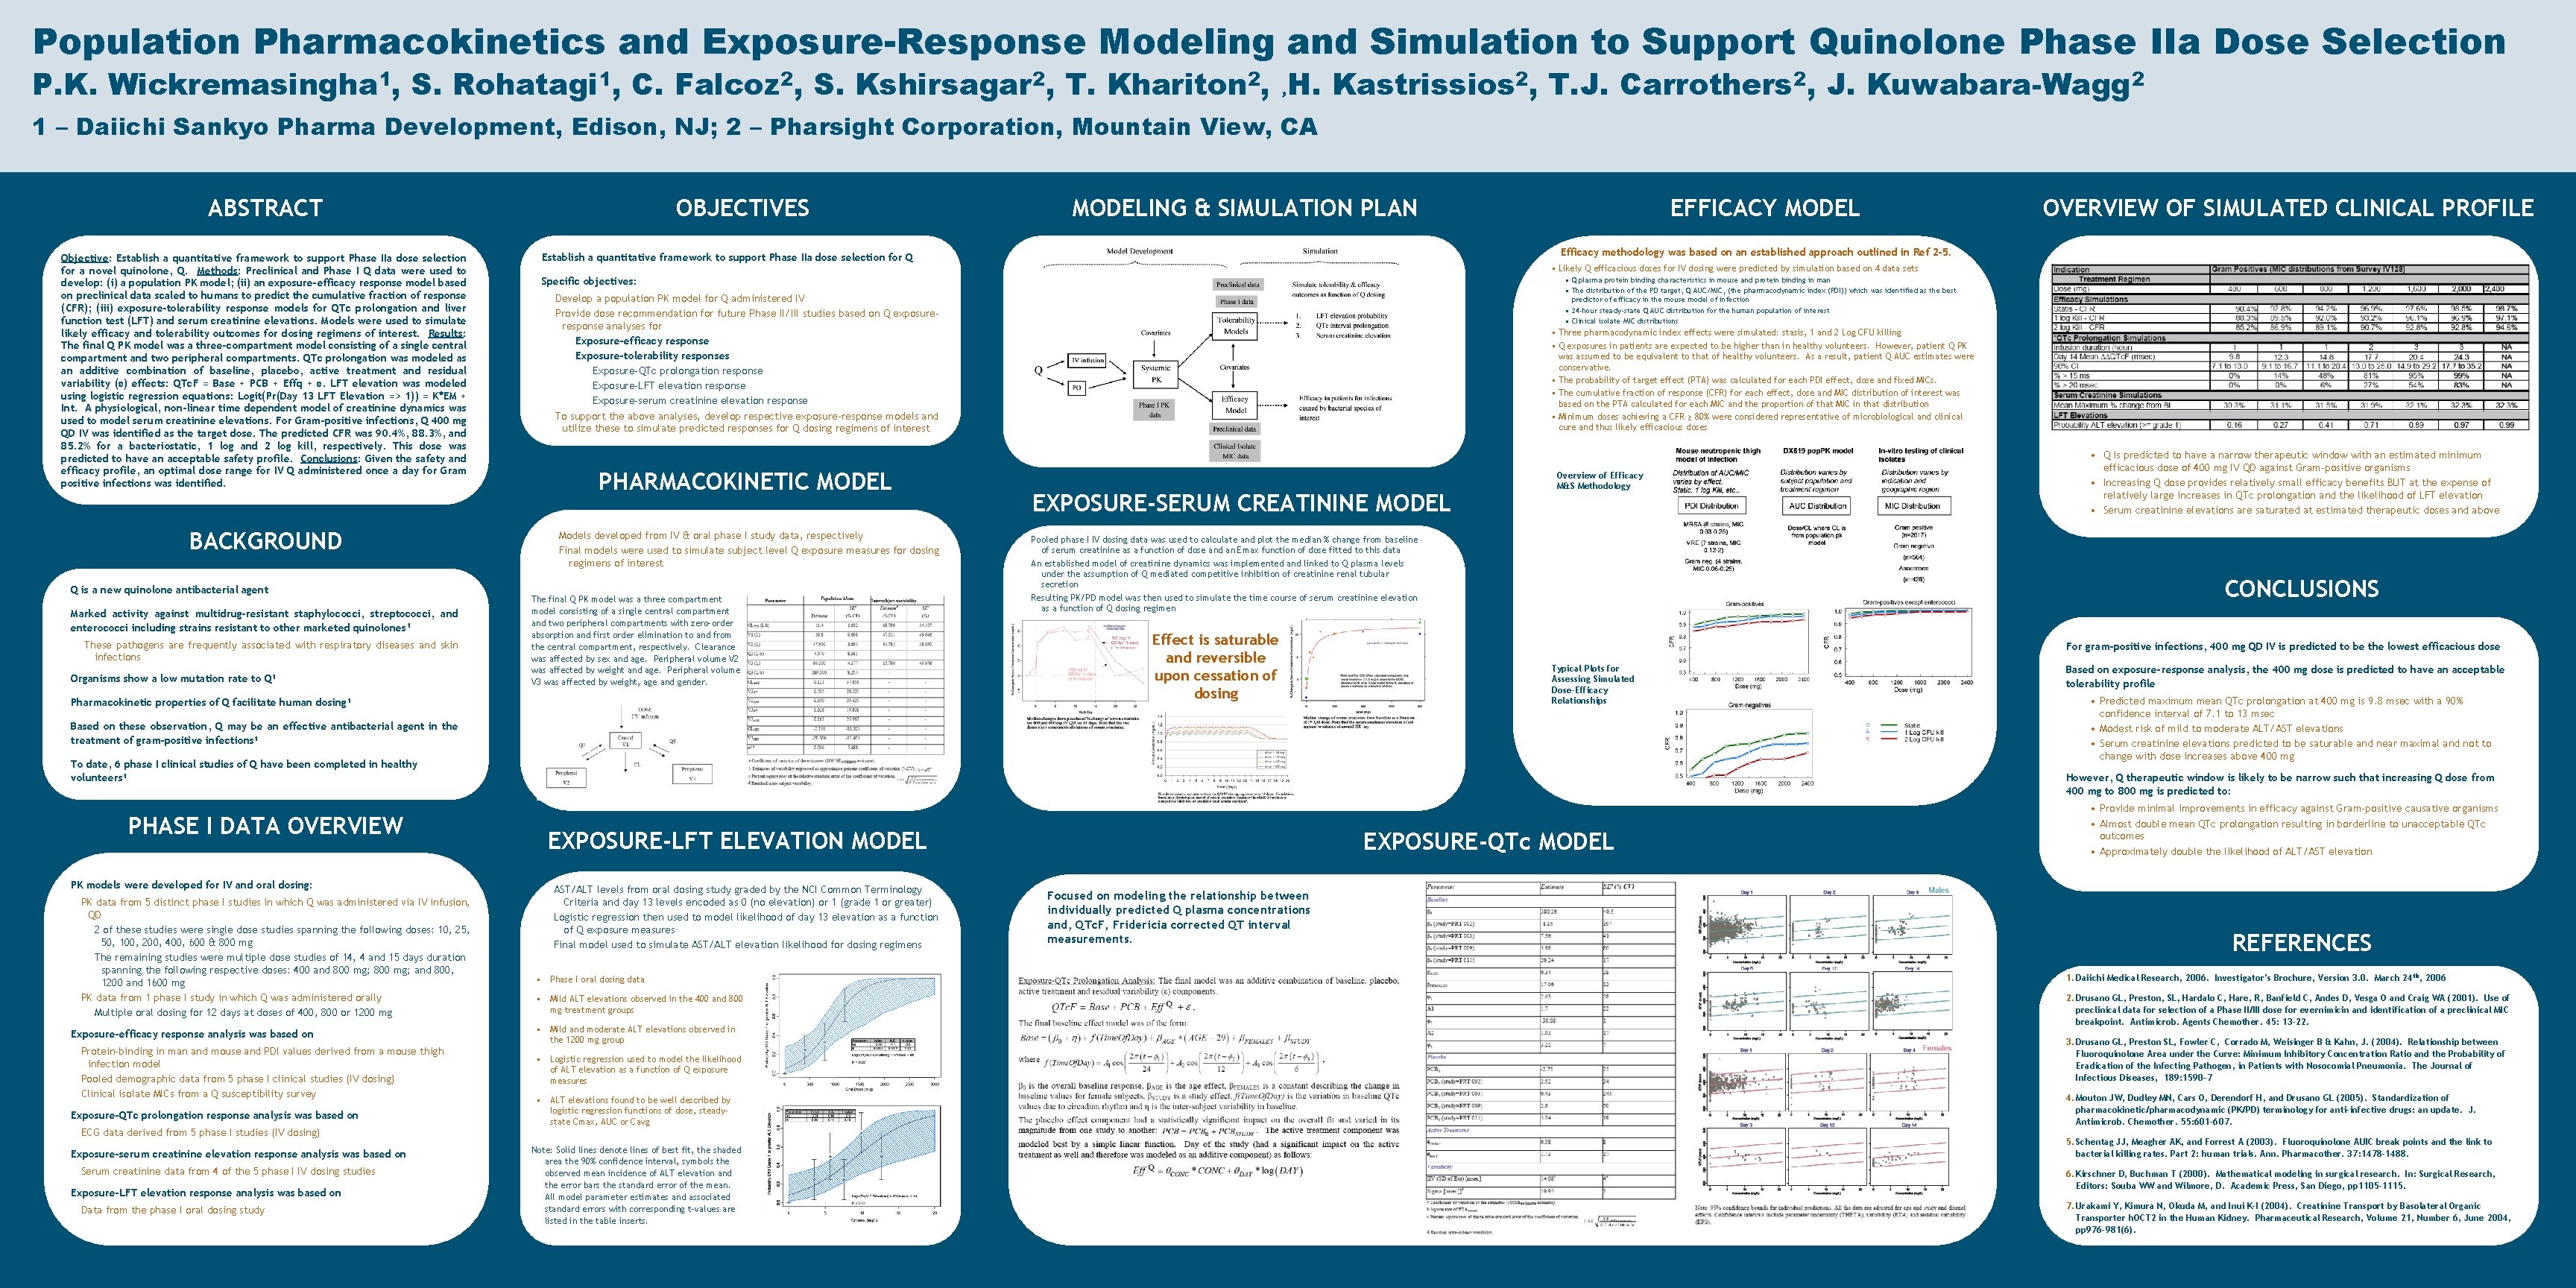 Population Pharmacokinetics and Exposure-Response Modeling and Simulation to Support Quinolone Phase IIa Dose Selection